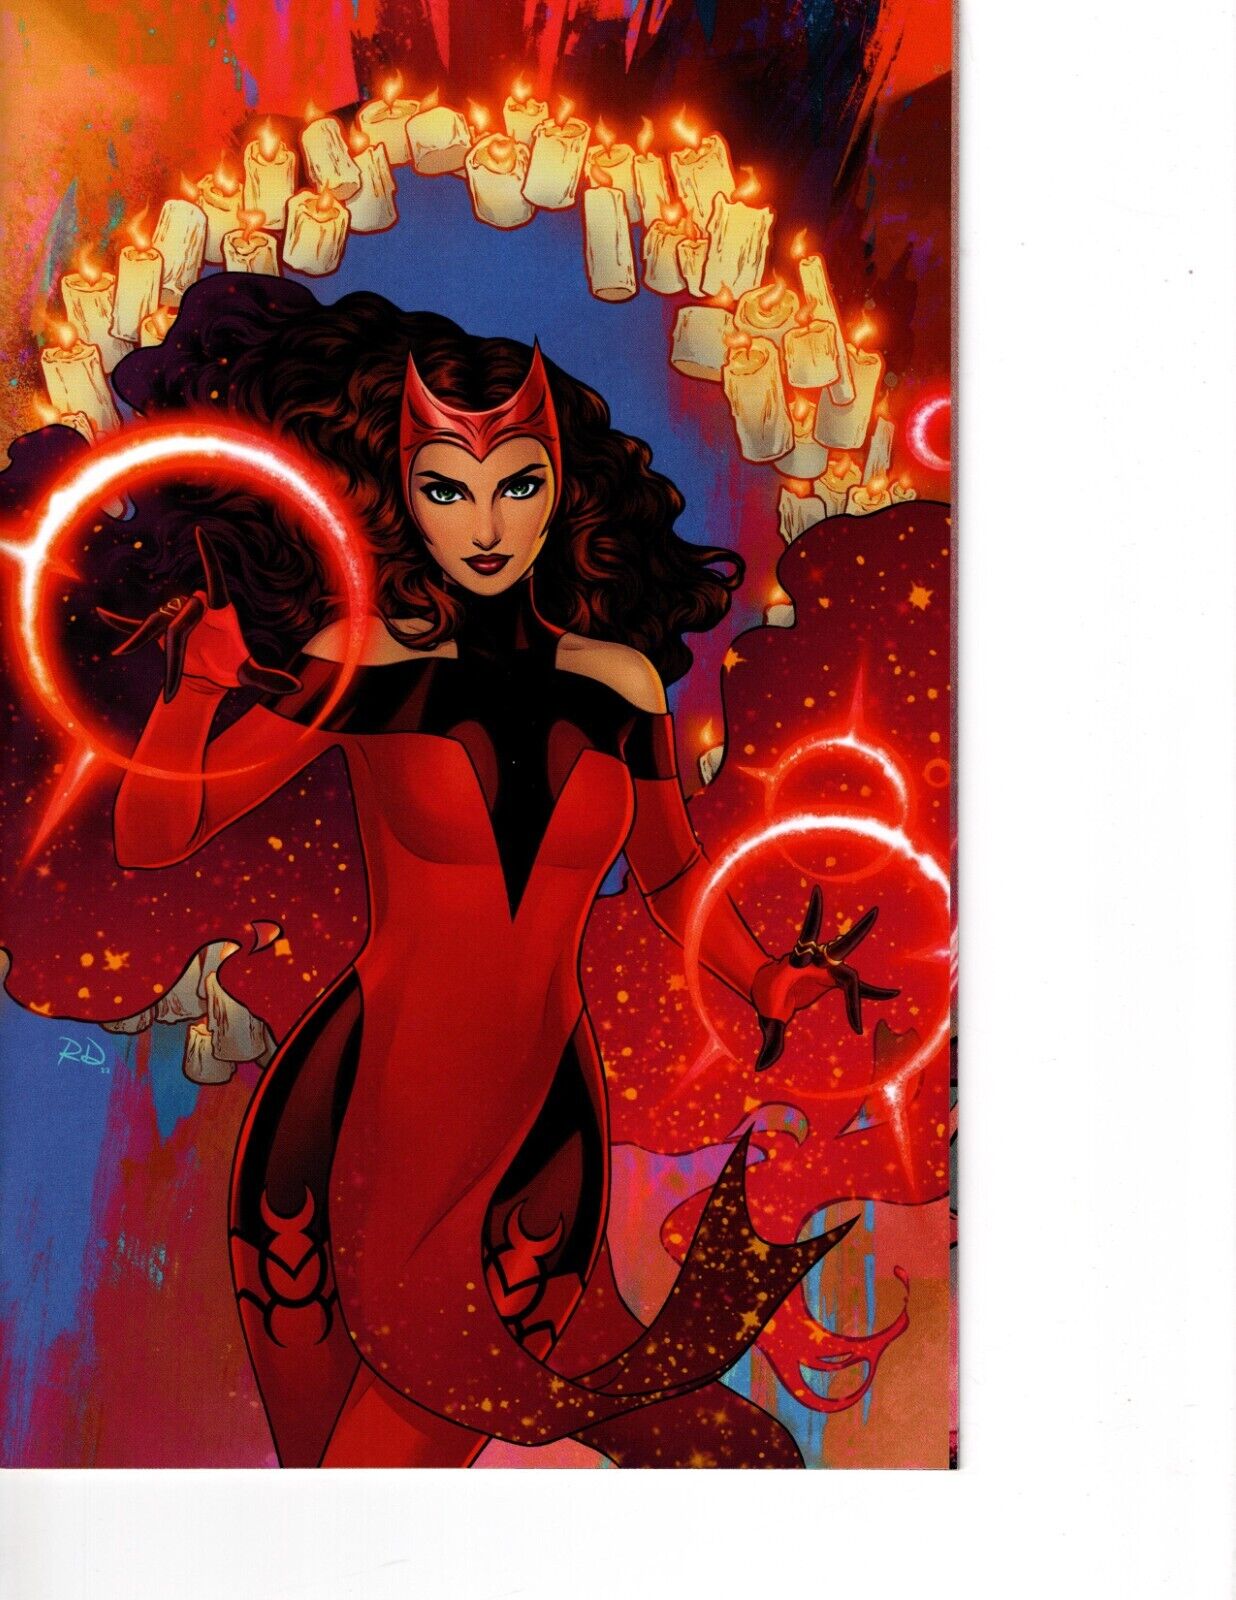 Scarlet Witch By James Robinson: The Complete Collection